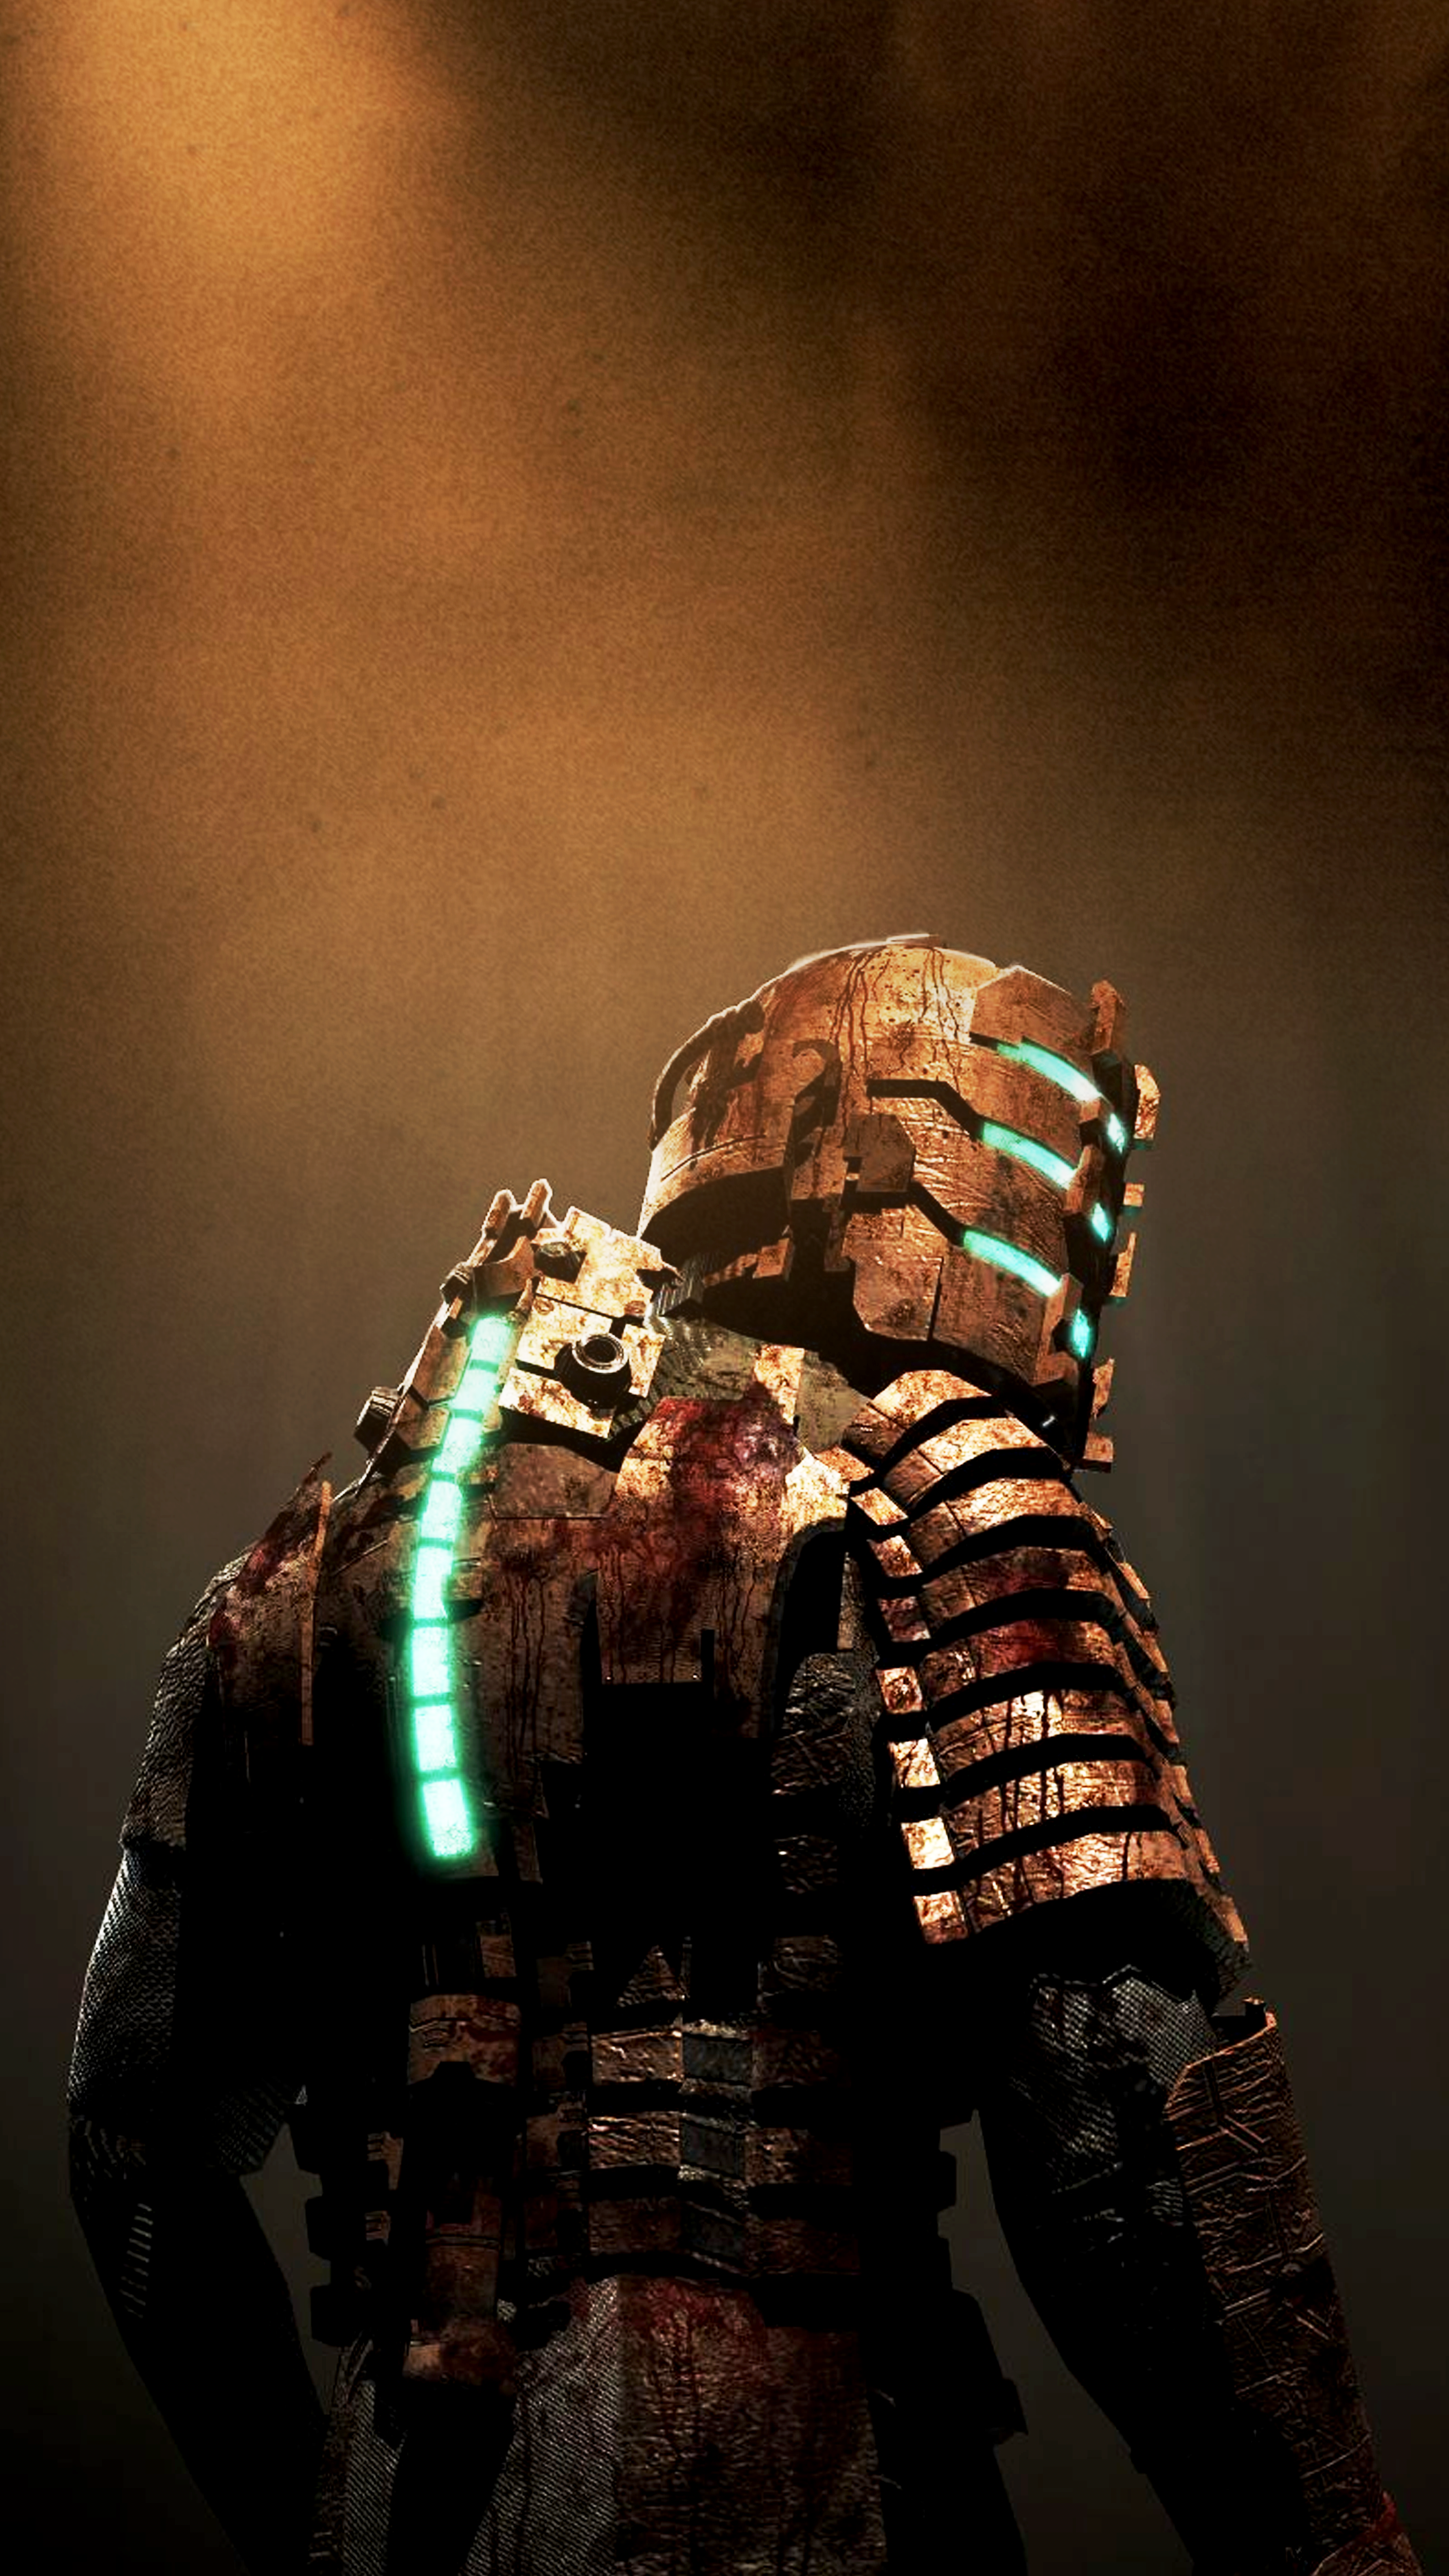 Combined a little of the lighting of the Deadspace remake stills